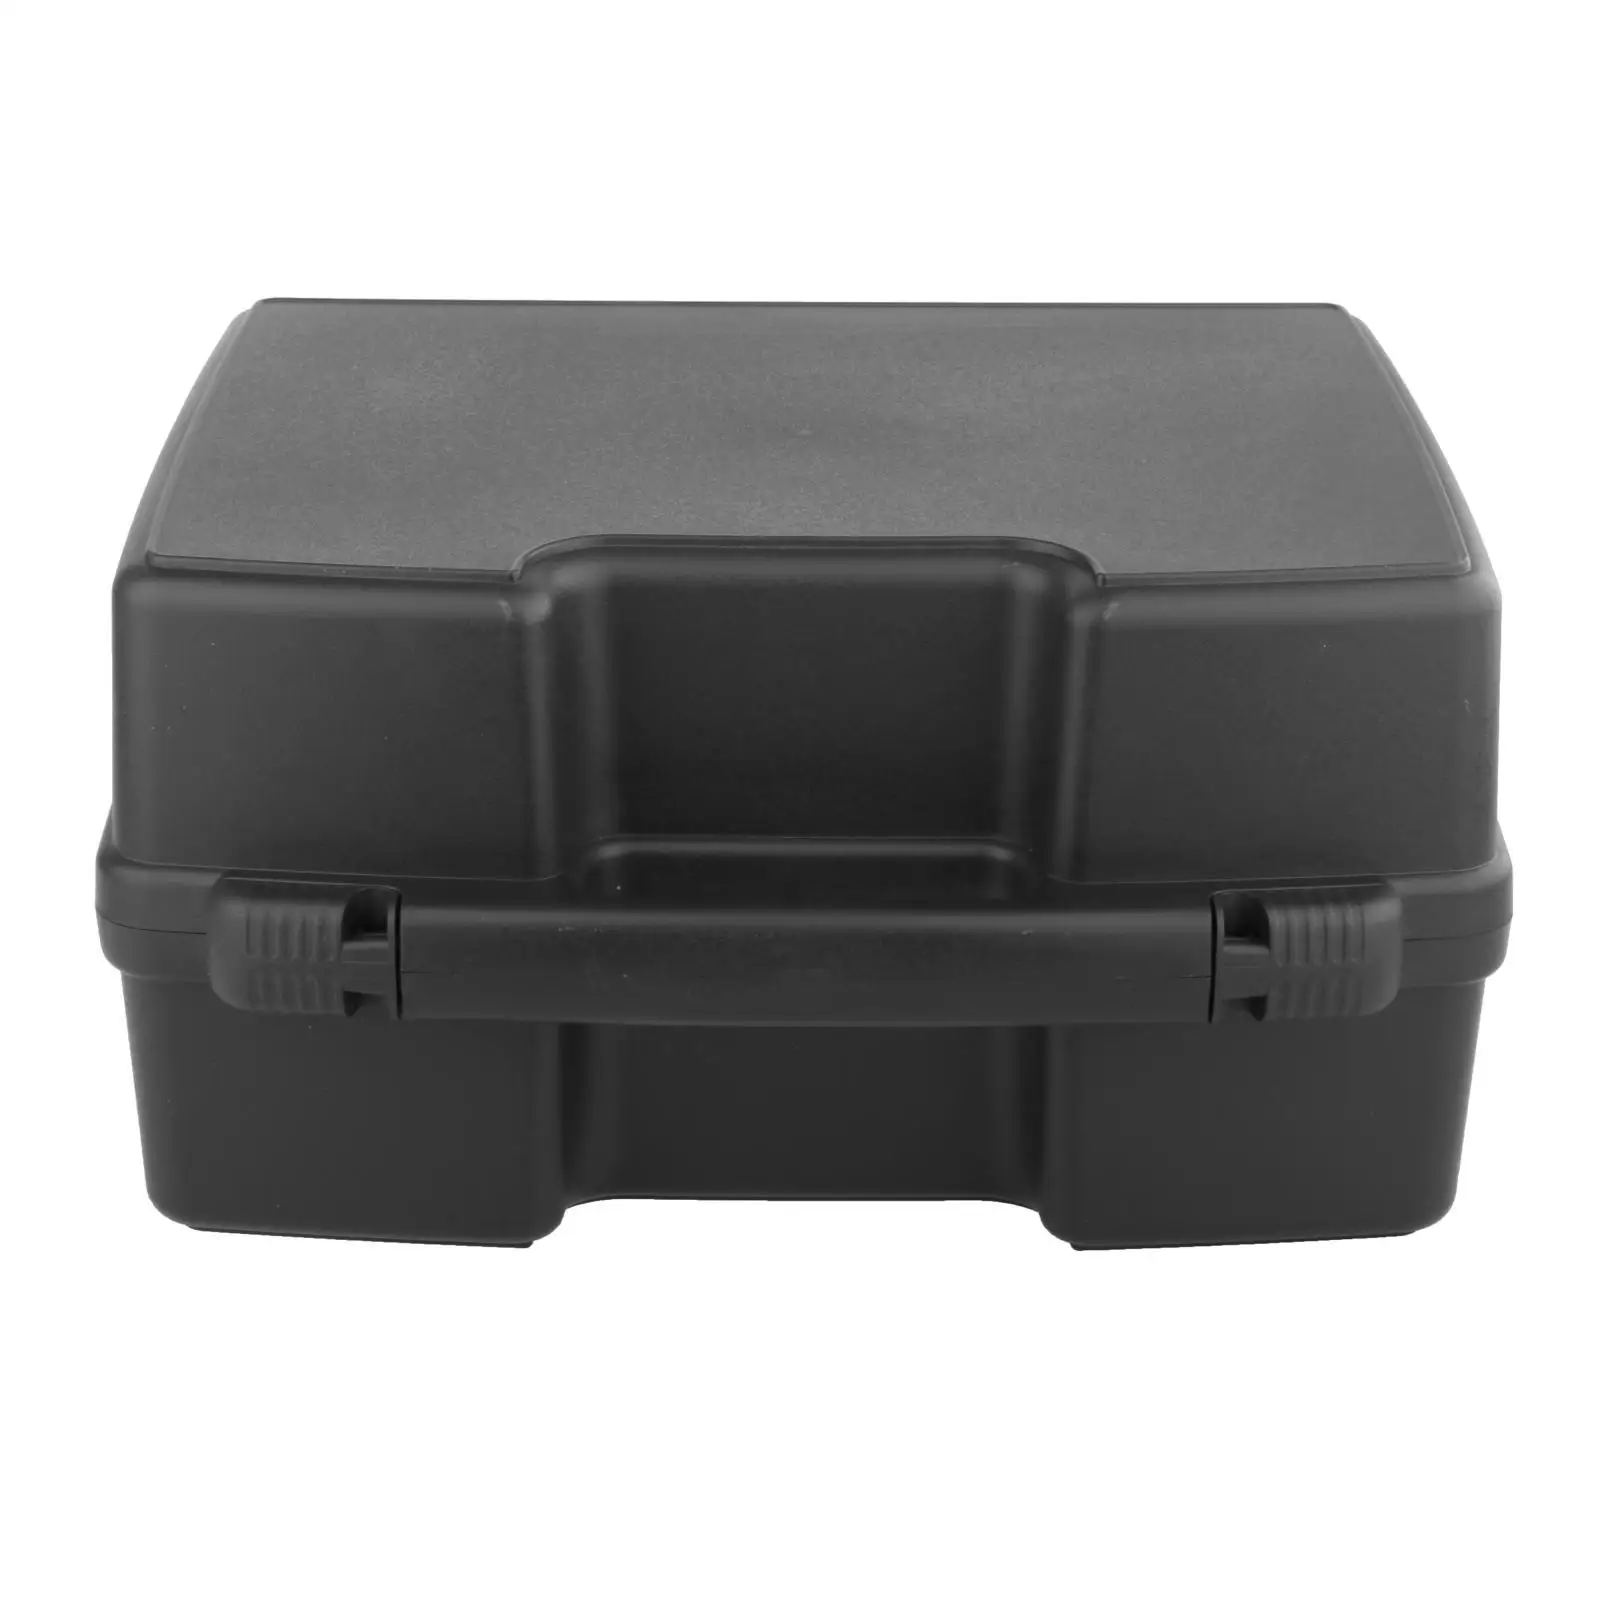 Protect Toolbox Sealed Shockproof Carrying Tool Box Openable Storage Case for Workplace